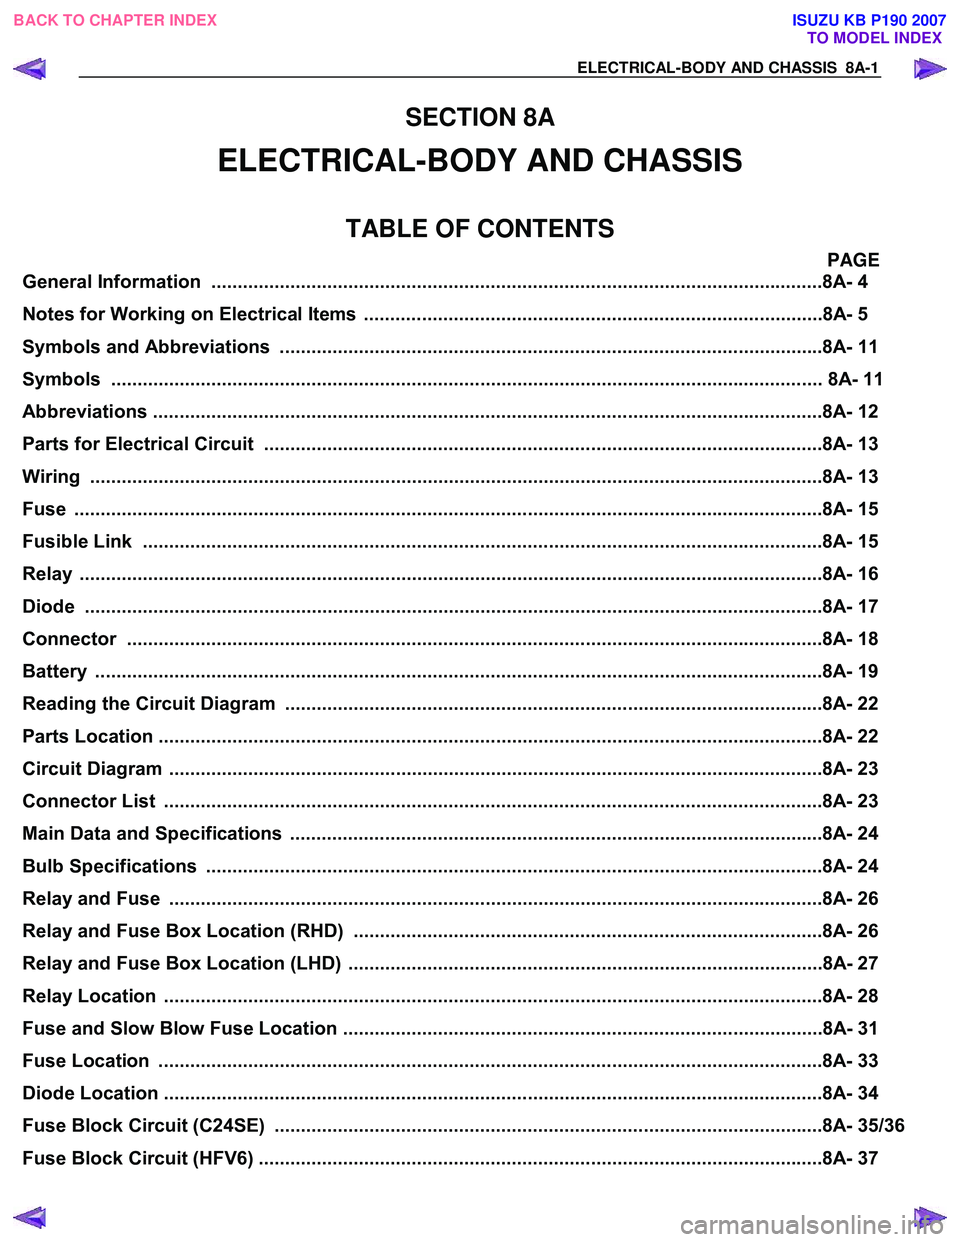 ISUZU KB P190 2007  Workshop Service Manual ELECTRICAL-BODY AND CHASSIS  8A-1 
SECTION 8A 
ELECTRICAL-BODY AND CHASSIS 
TABLE OF CONTENTS 
PAGE 
General Information ...............................................................................